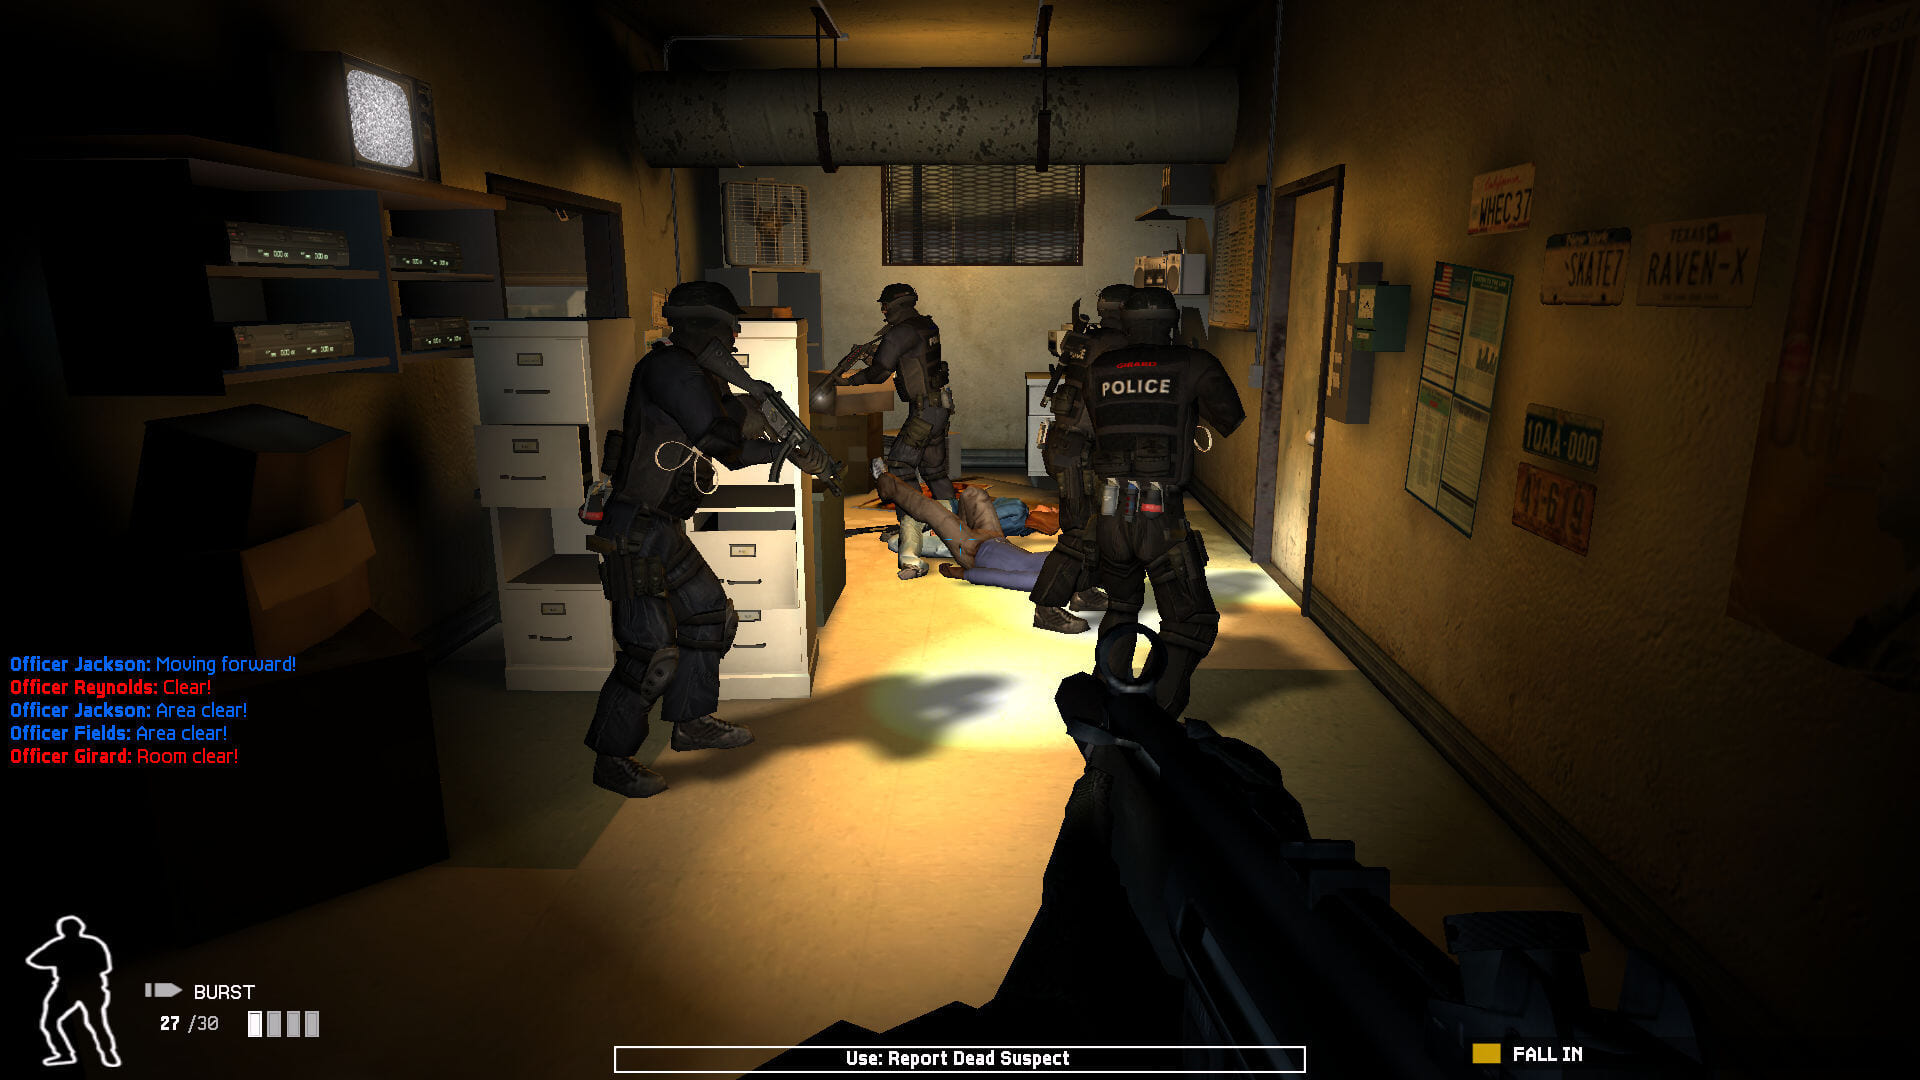 Frankly, some people out there would say SWAT 4's dilapidated locations could be horrific at times